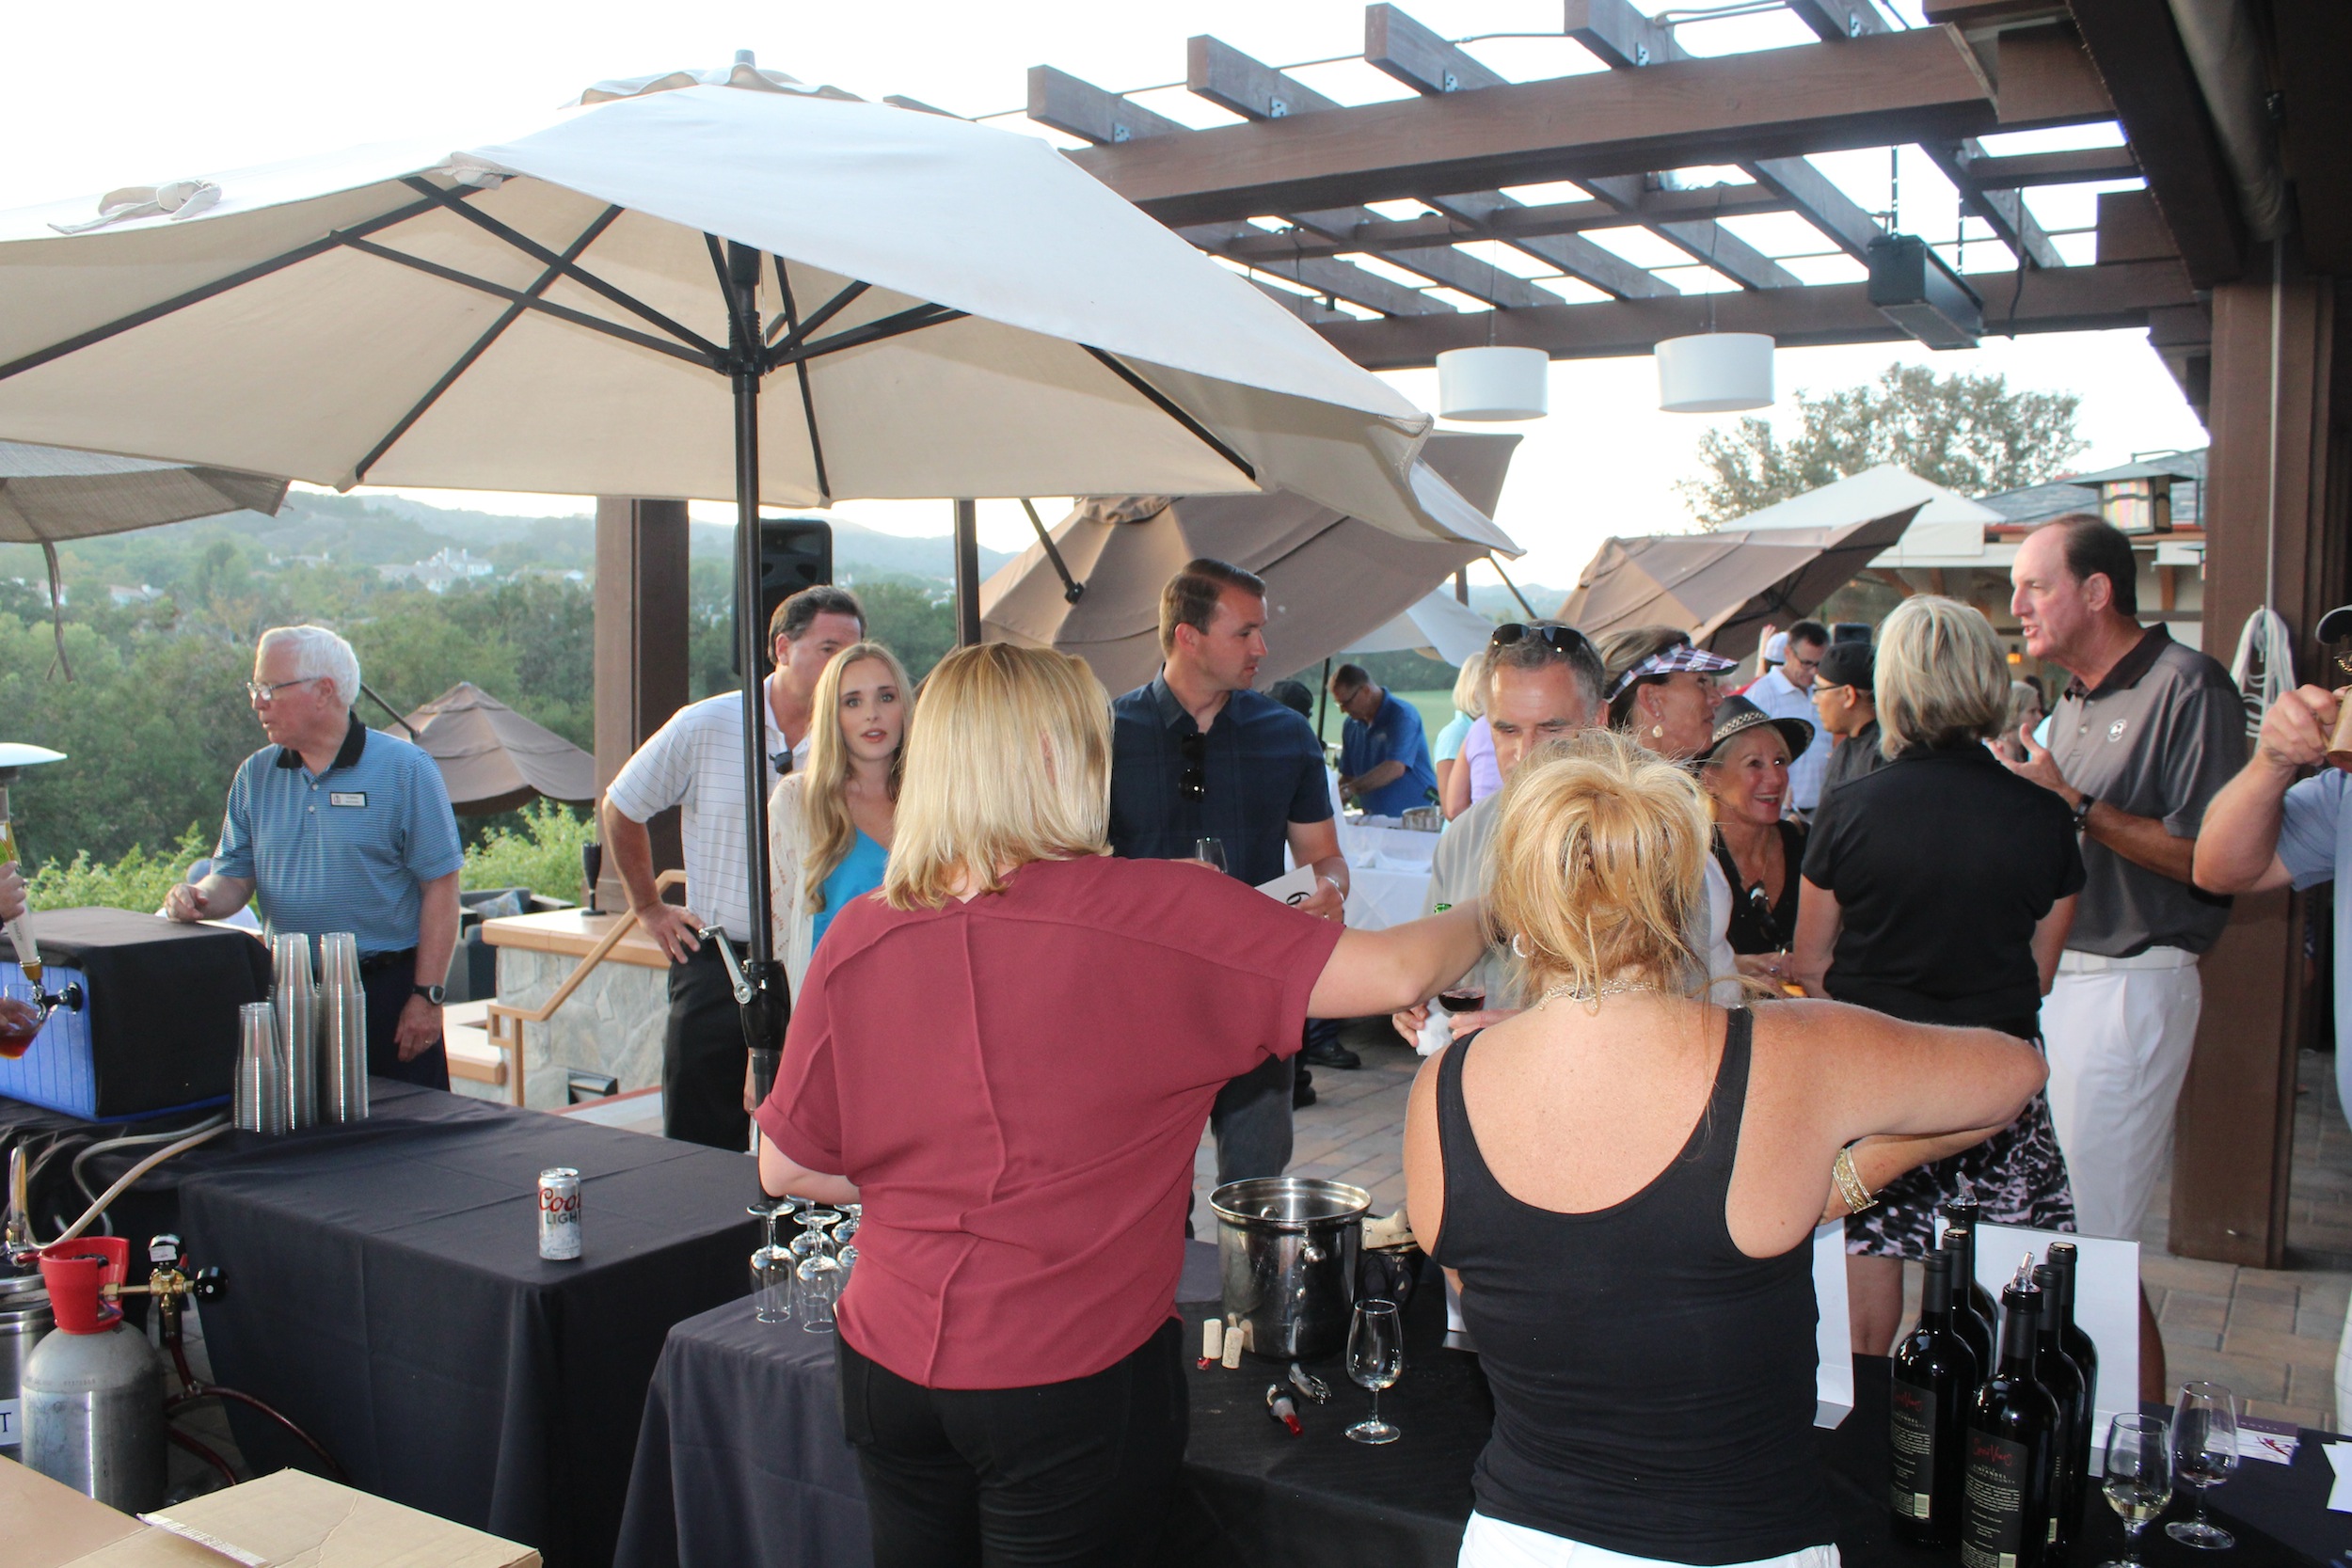 Coto de Caza Golf and Racquet Club ClubCorp Classic. Spicy Vines sponsors wine bar supporting  ALS Augie's Quest, California Youth Services and Child Abuse Prevention Center.